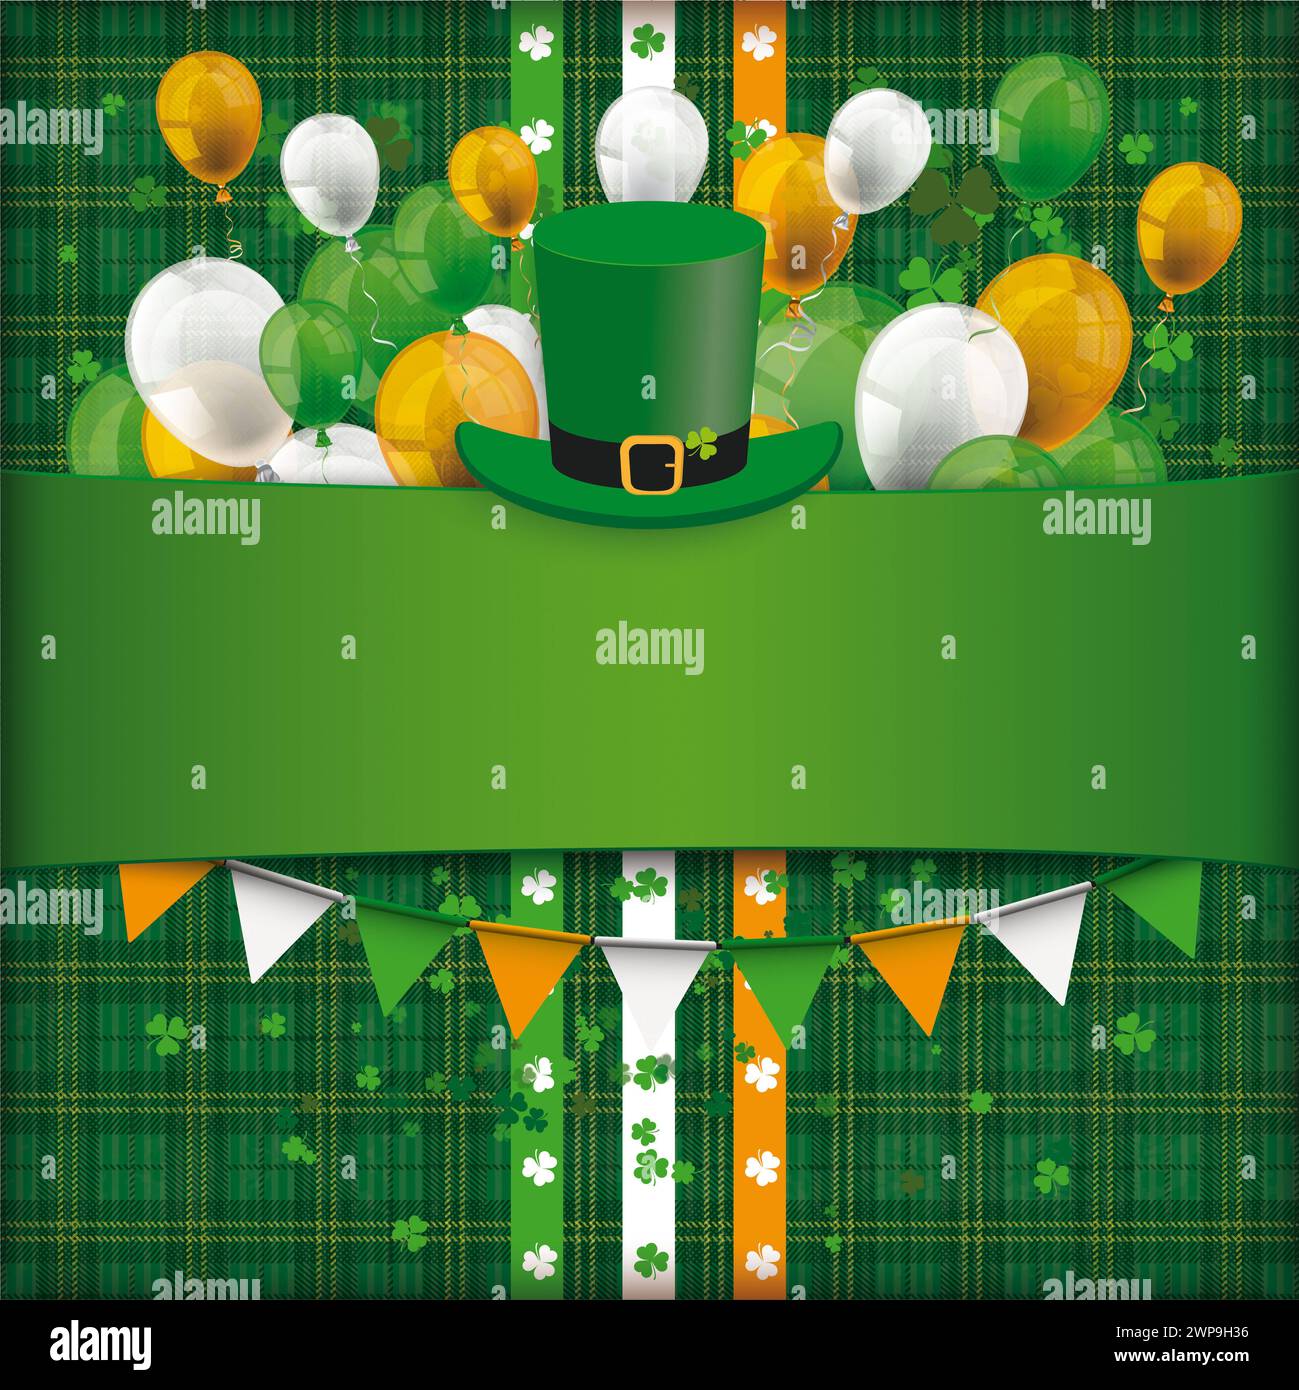 Empty St Patricks Day Shamrock Tartan Cover Balloons Garlands Vintage cover for St. Patrick s Day. Stock Photo